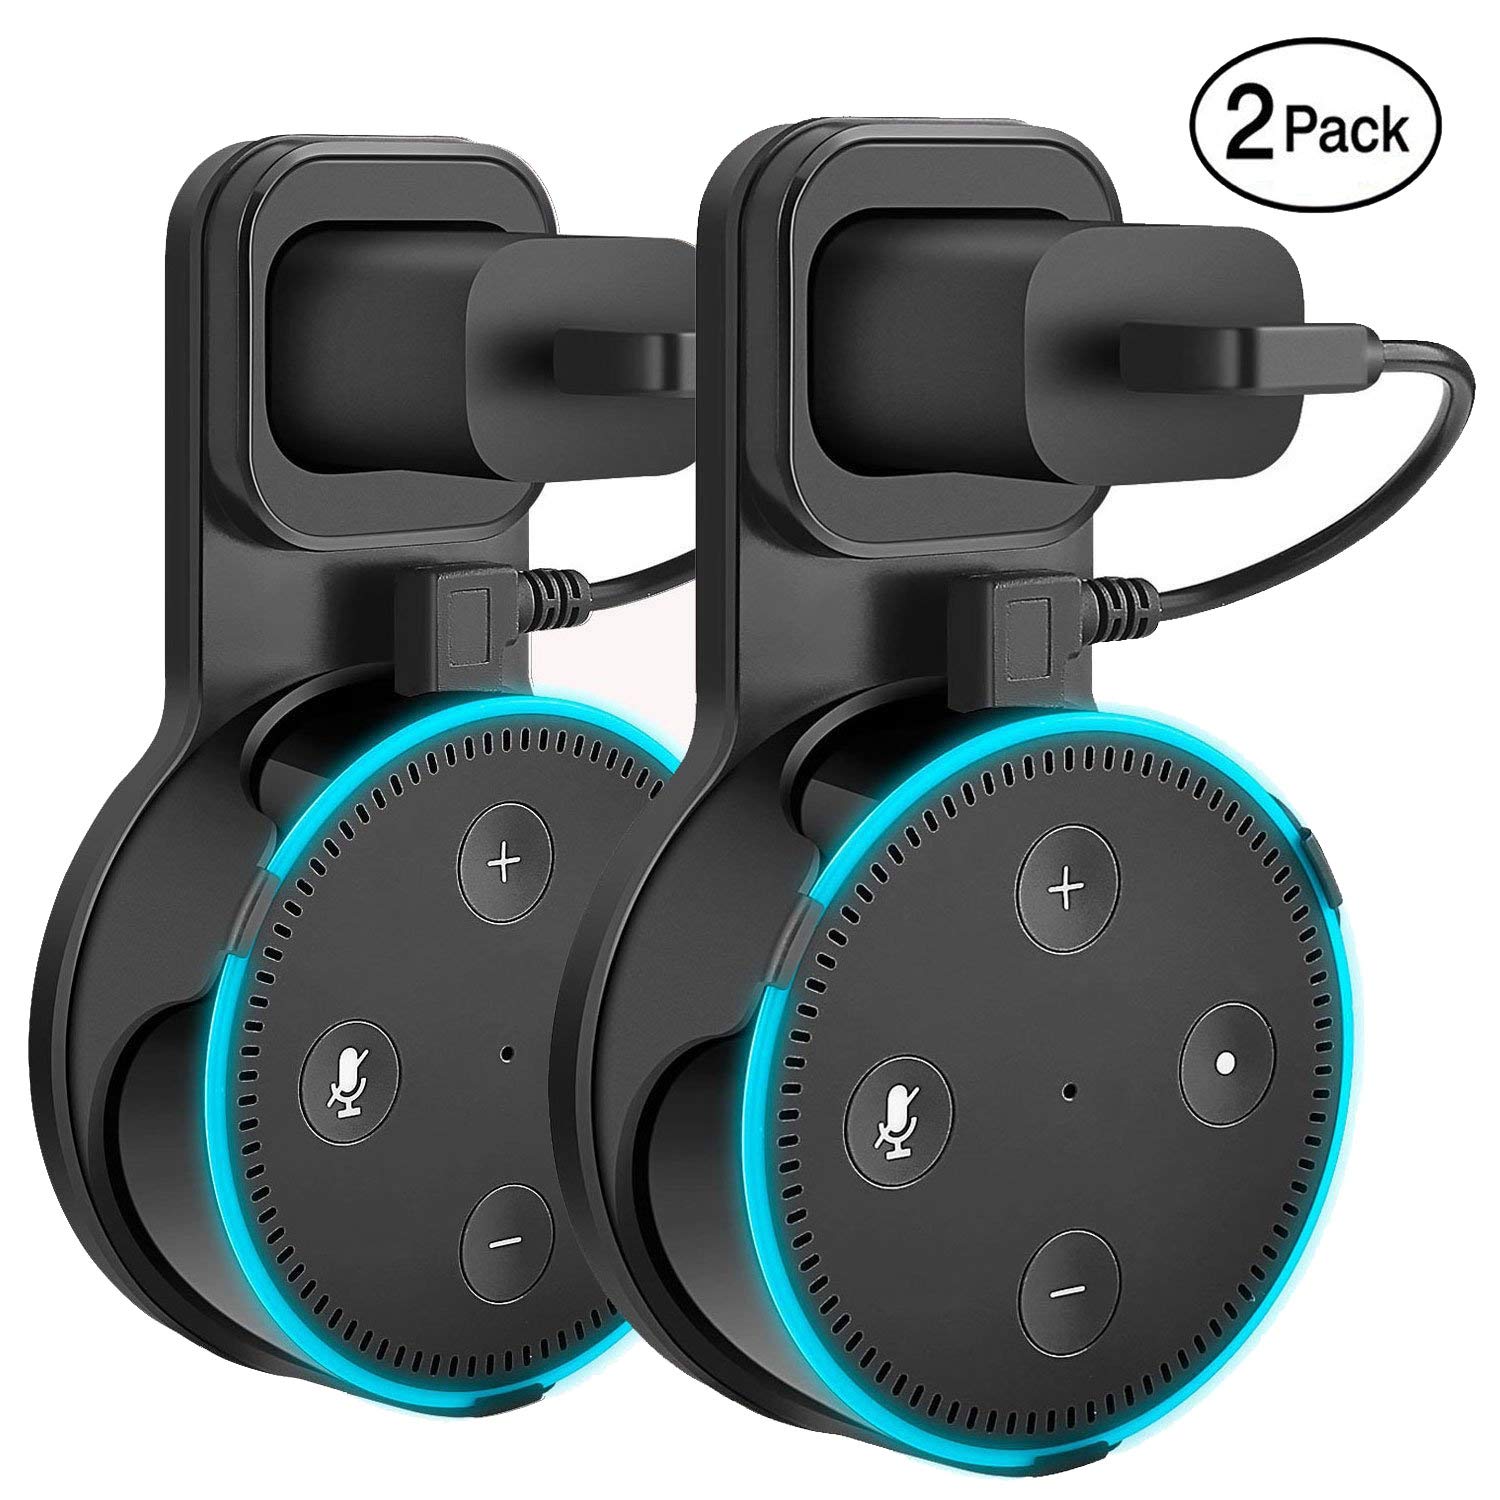 Book Cover Yuanling Outlet Wall Mount Hanger Stand for Dot 2nd Generation, A Space-Saving Solution for Your Smart Home Speakers Without Messy Wires or Screws (Black 2 Pack)